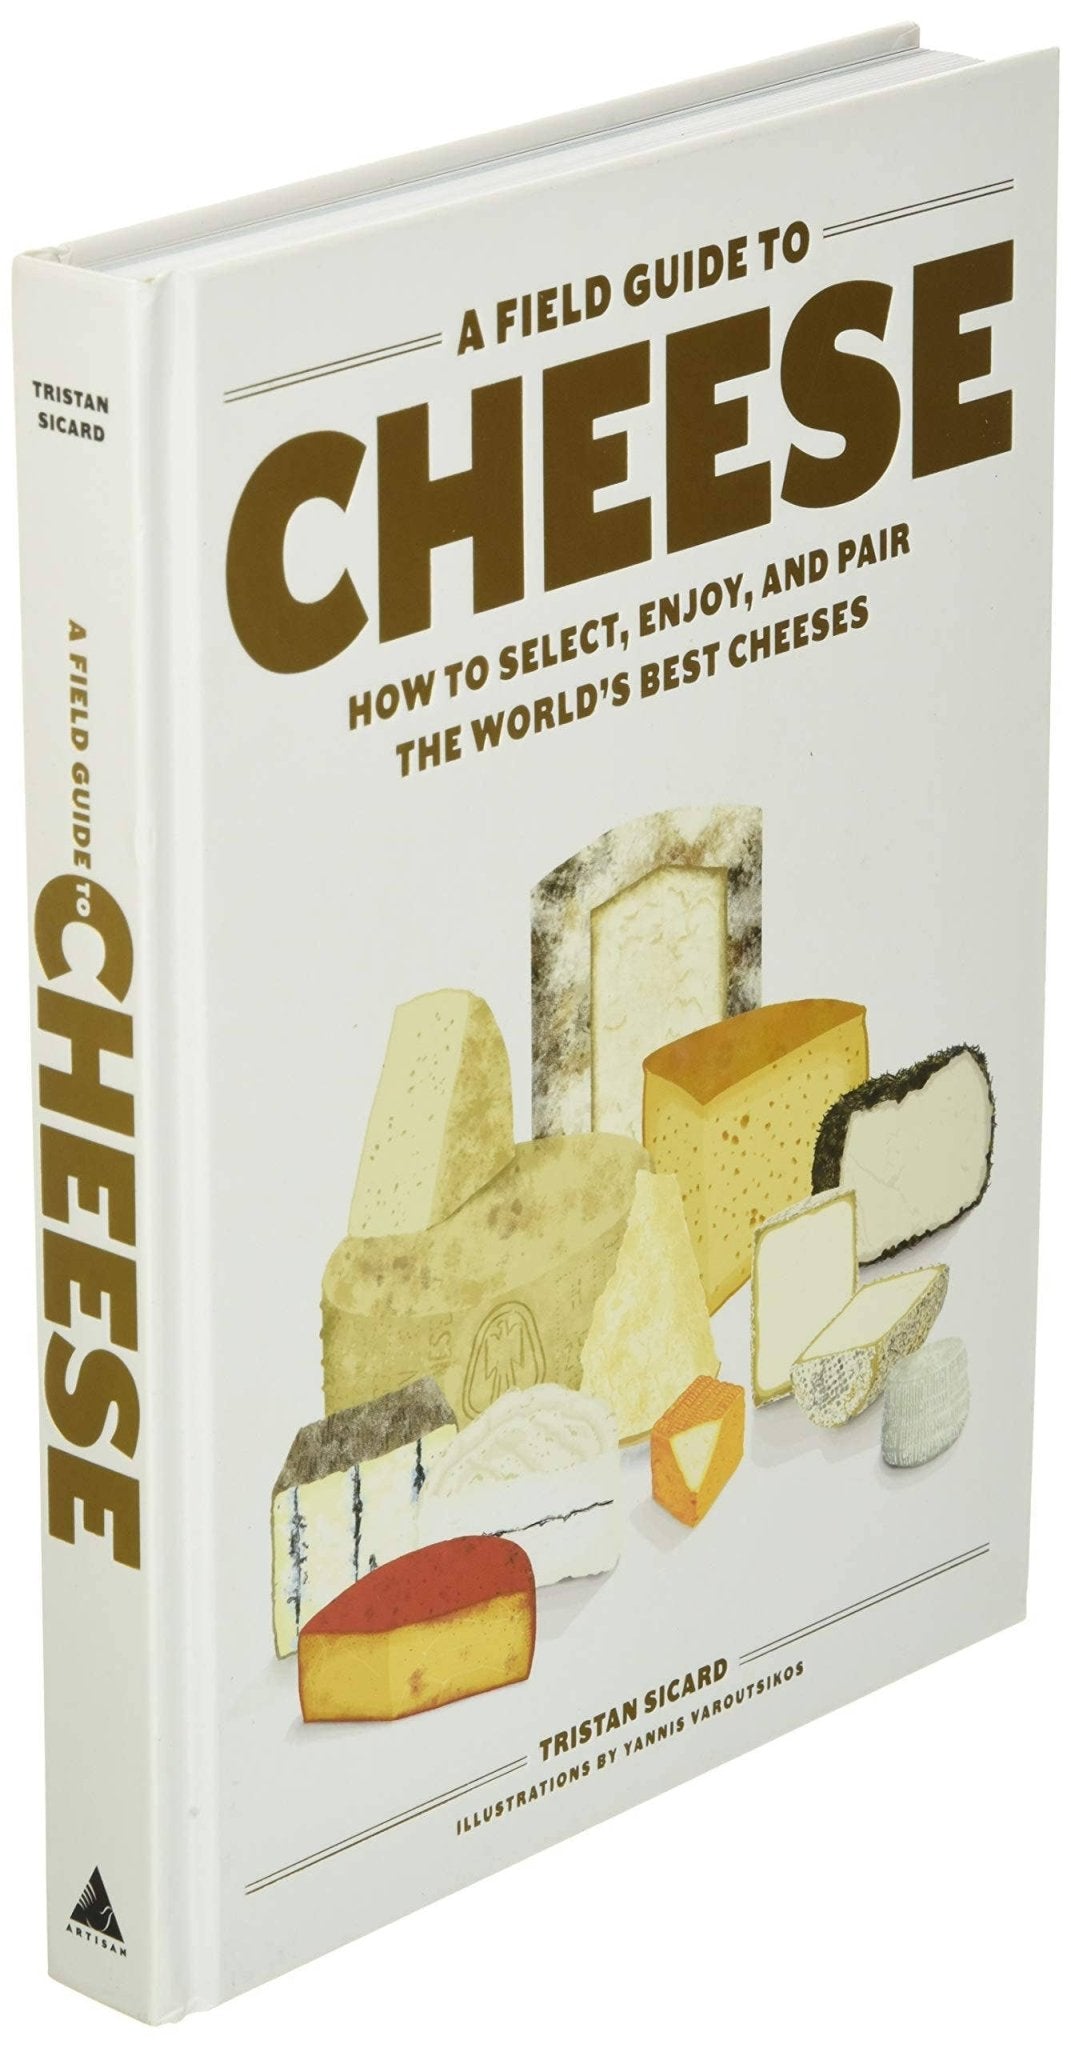 Field Guide to Cheese: How to Pair the World's Best Cheeses - Abigail Fox Designs